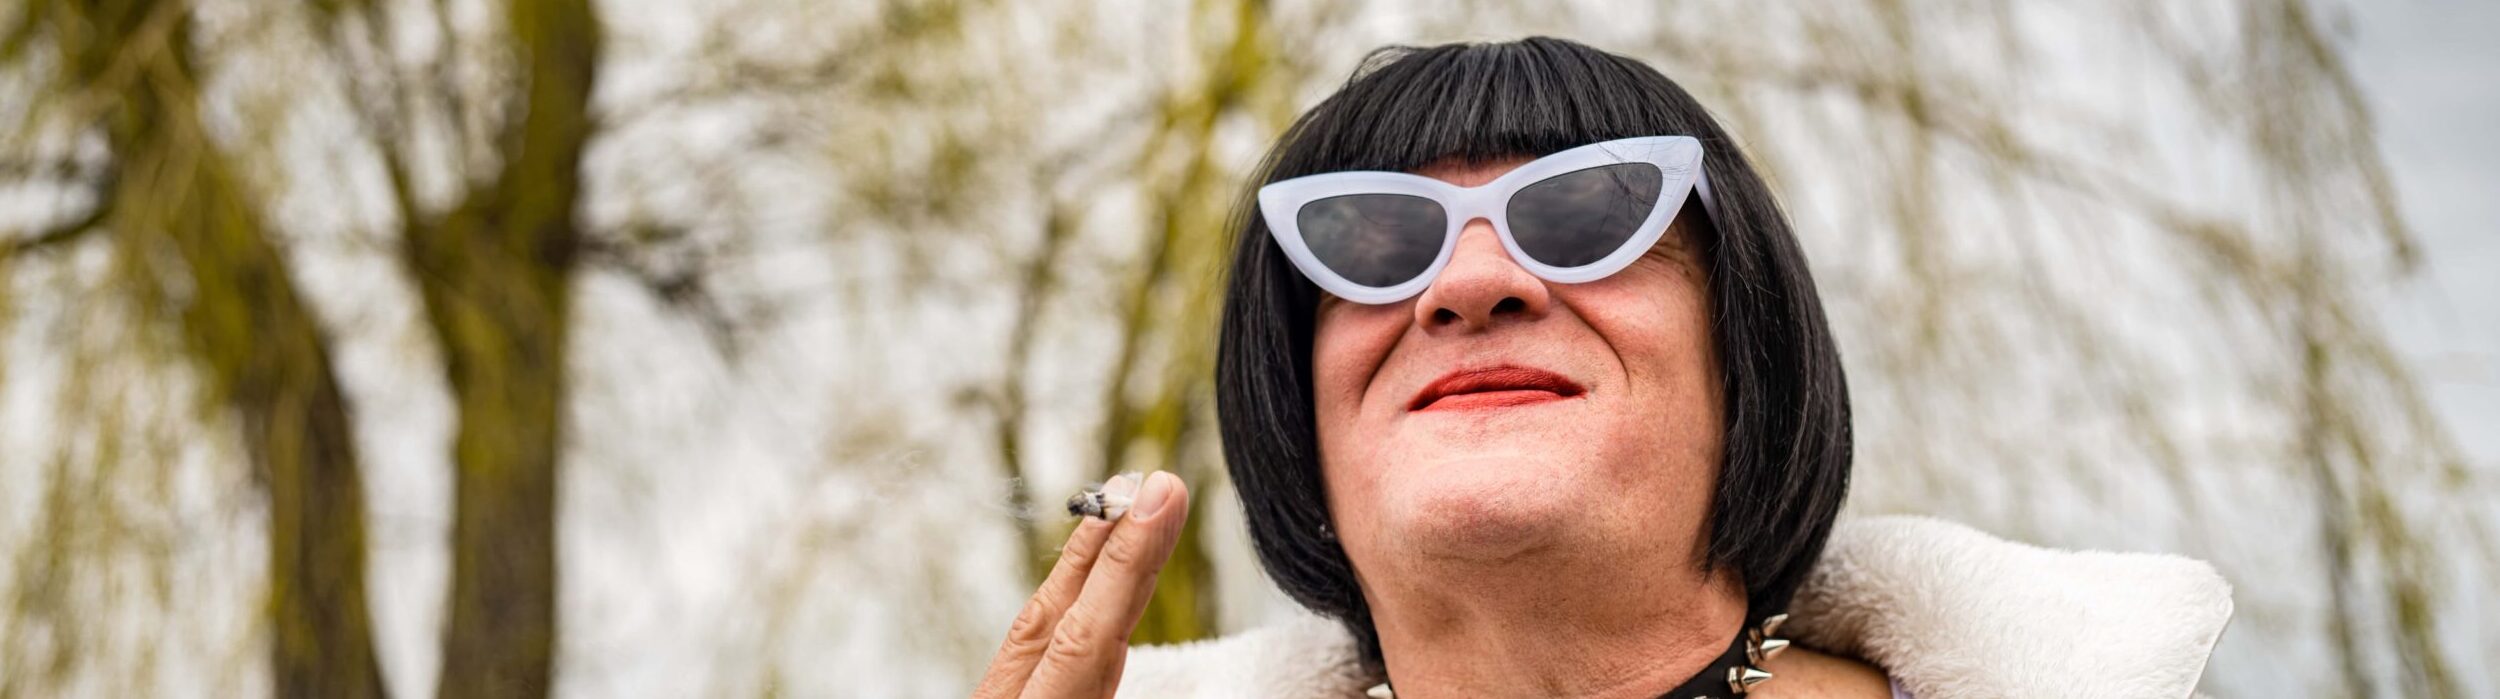 Transgender woman with cool sunglasses, a white coat, a black bob haircut. She is holding a cigarette. 